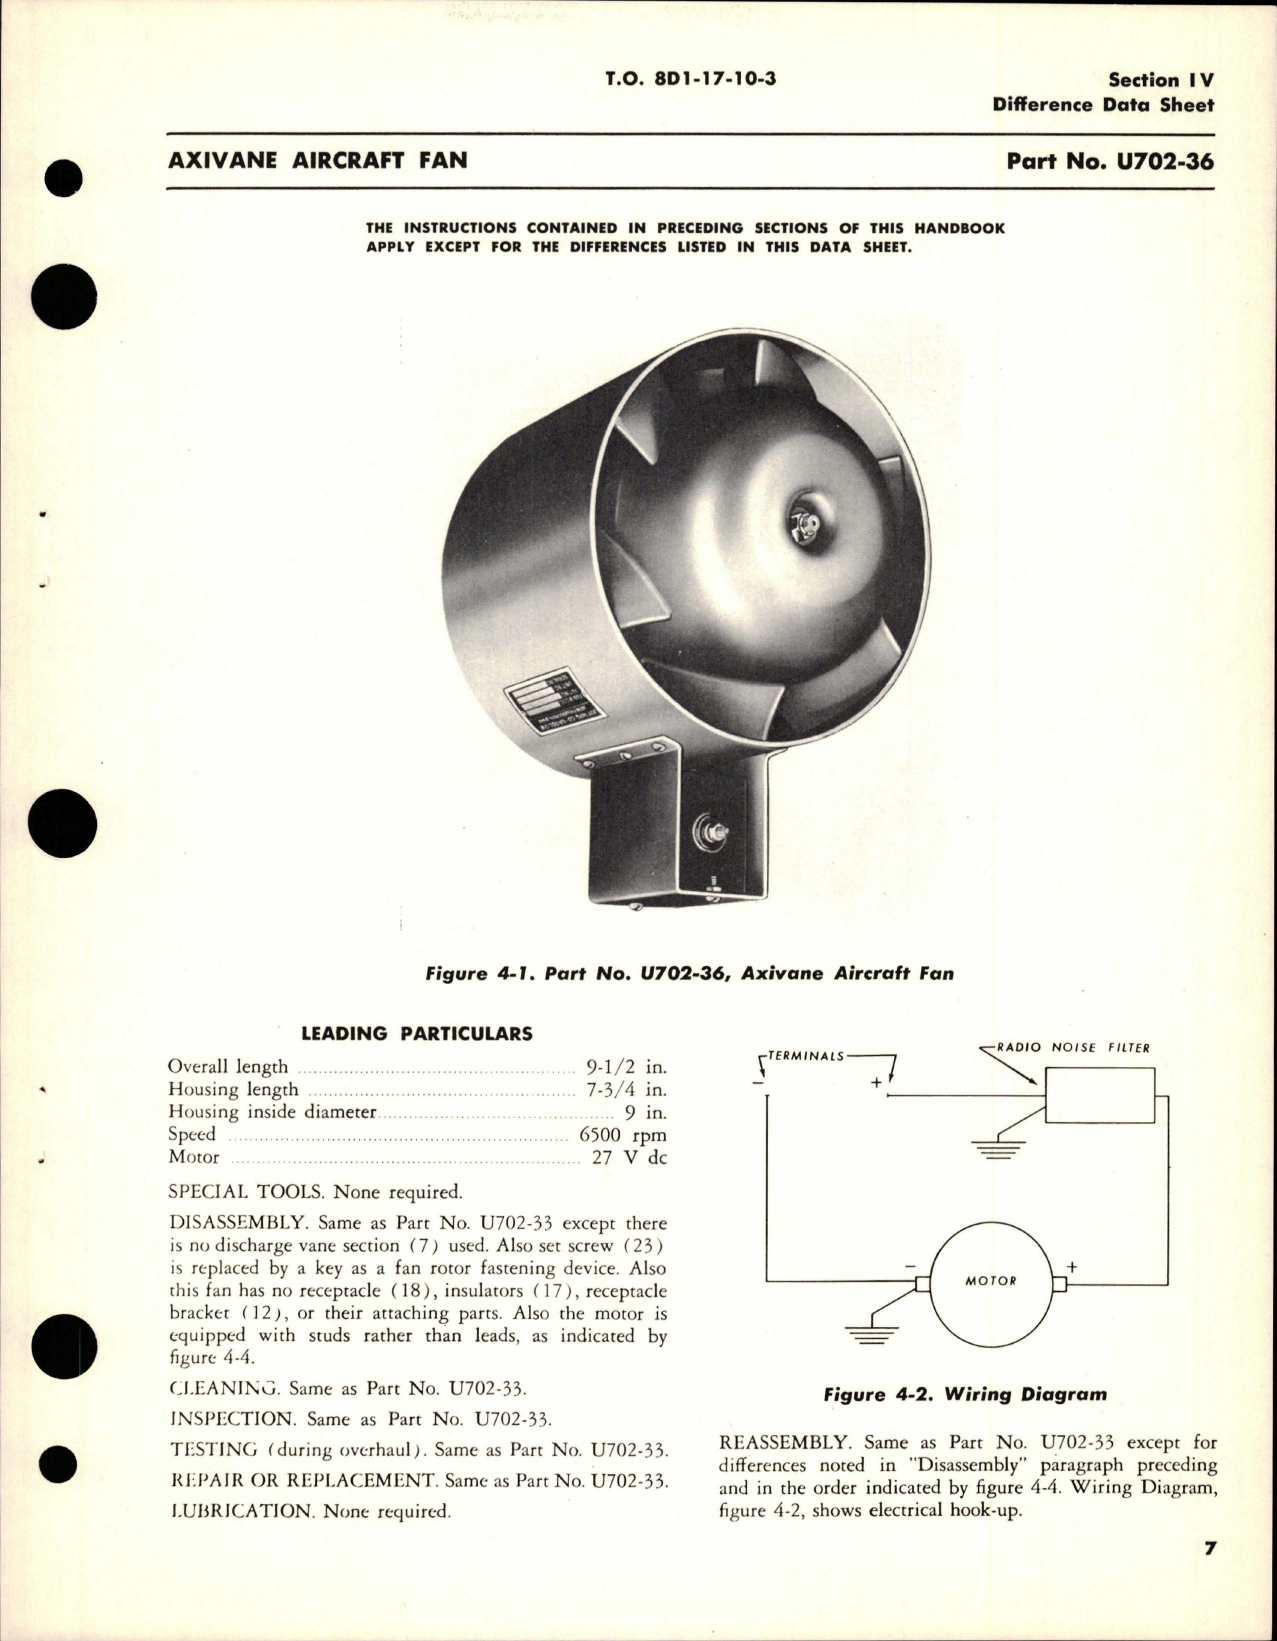 Sample page 9 from AirCorps Library document: Overhaul Instructions for Axivane Aircraft Fans 